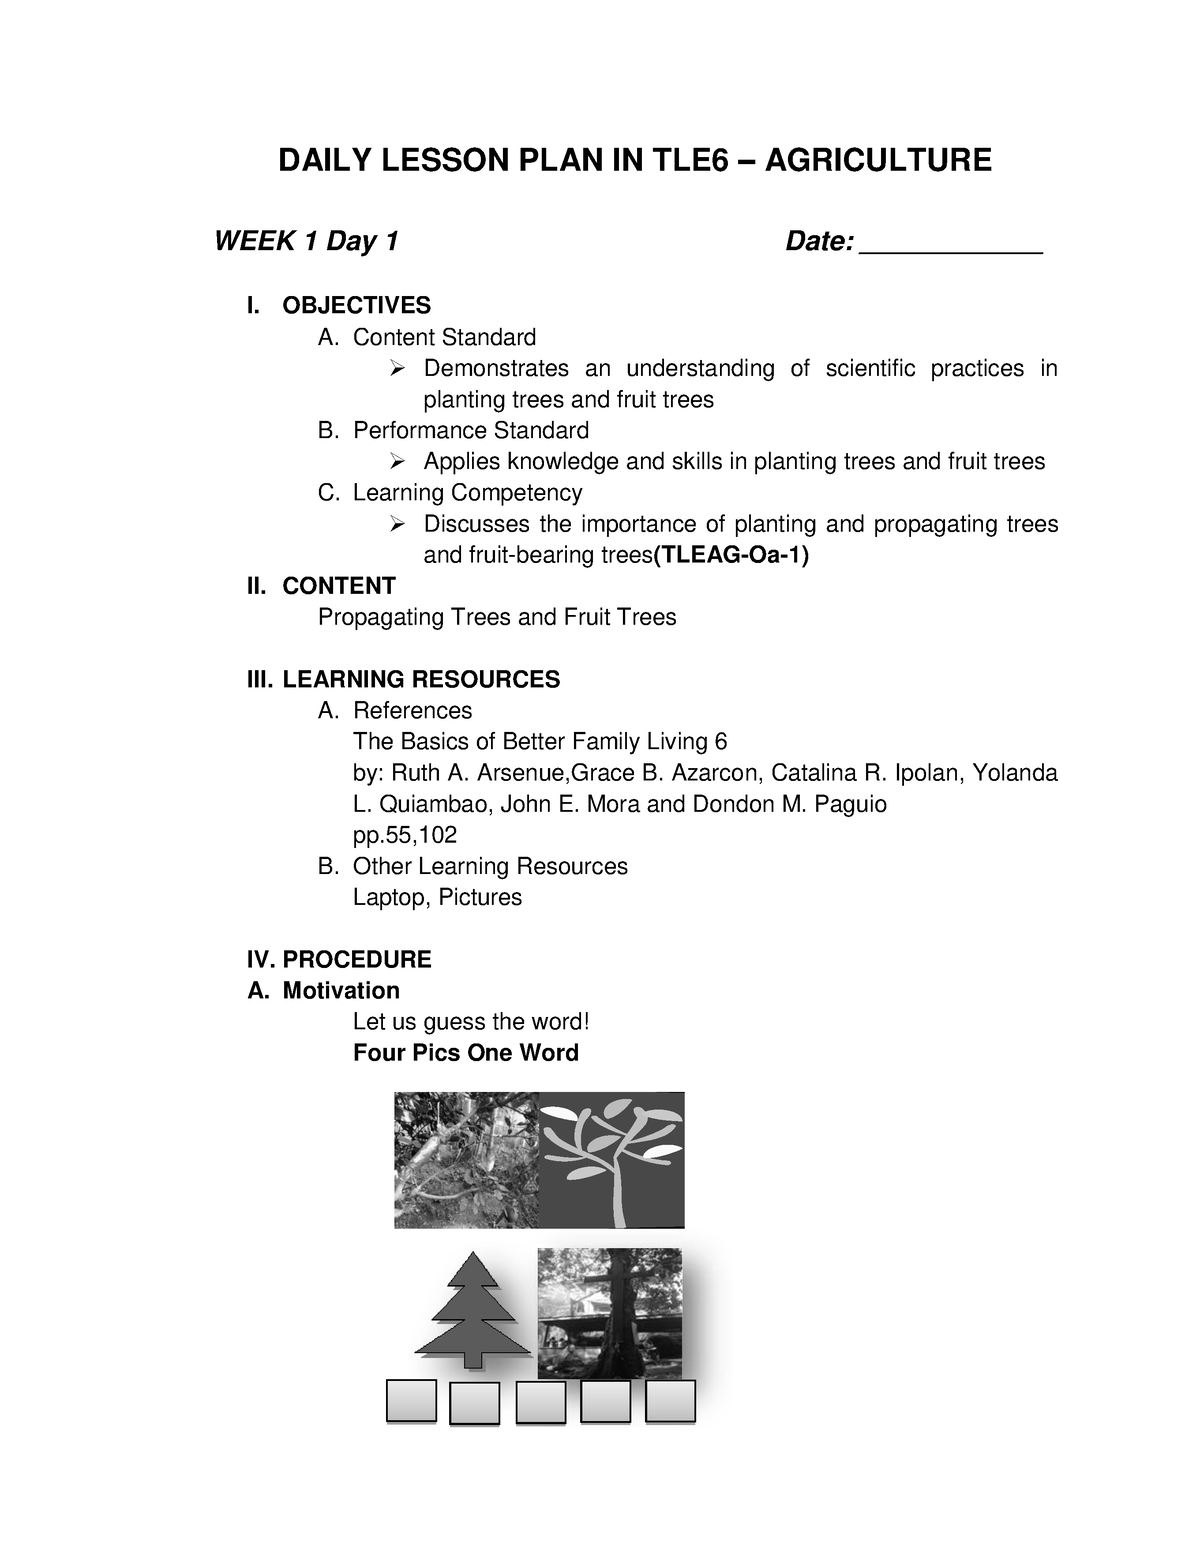 Grade 6 Dlp Tle Agriculture Week 1 Daily Lesson Plan In Tle6 Agriculture Week 1 Day 1 Date 5878